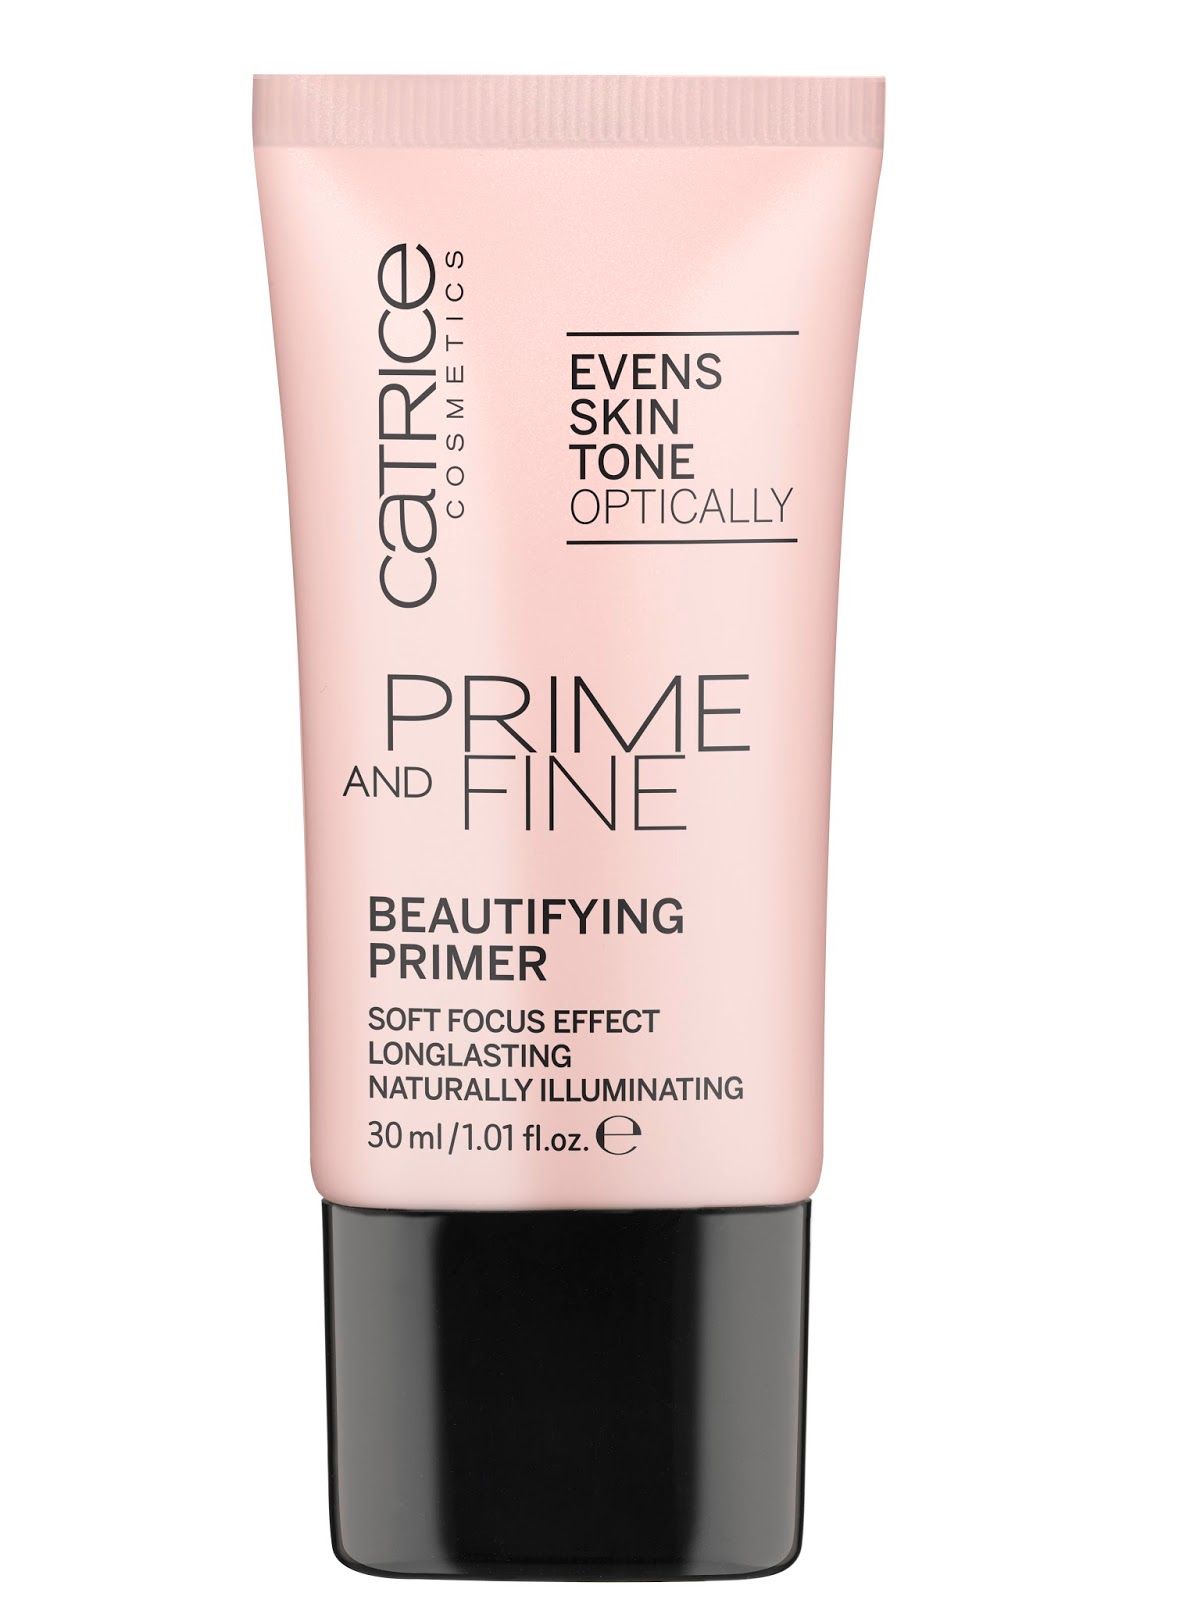  Prime and Fine Beautifying Primer, catrice